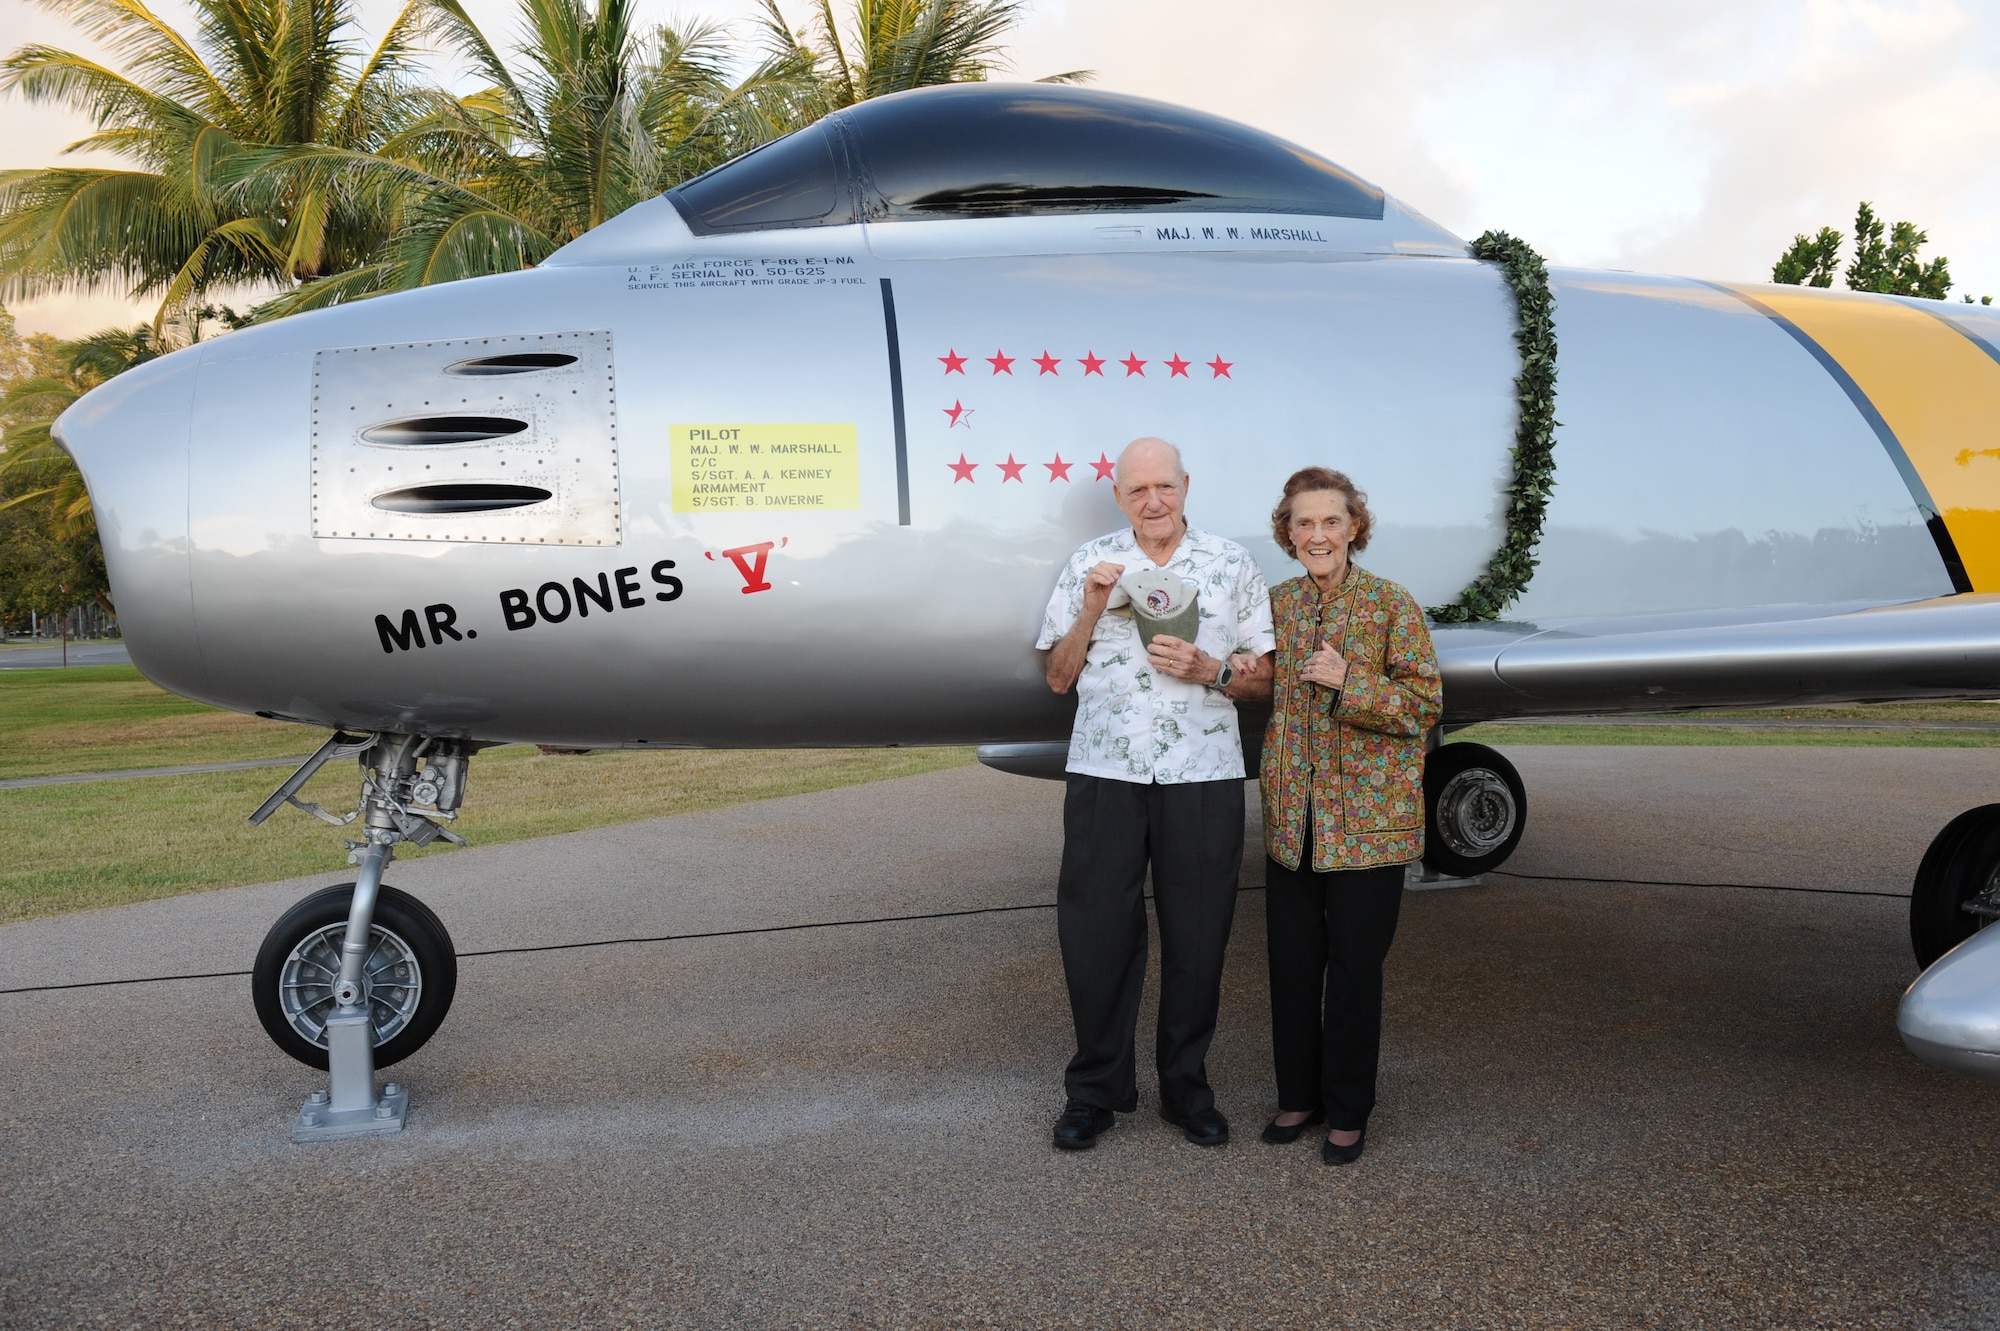 Retired U.S. Air Force Lt. Gen. Winton W. “Bones” Marshall, a combat commander, Korean War ace and former PACAF vice commander, and wife, Millie, who served in WWII as one of the original Women Airforce Service Pilots, pose for a photo in front of the newly repainted static F-86E Sabre fighter aircraft at Joint Base Pearl Harbor-Hickam, Hawaii, Dec. 8, 2011. The Pacific Air Forces and 15th Wing leadership dedicated the aircraft to Marshall in recognition of his sacrifice and service during the Korean War. He is credited with 6 1/2 enemy aircraft destroyed, seven probable aircraft destroyed and six aircraft damaged. (U.S. Air Force photo/Staff Sgt. Gustavo Gonzalez/Released)